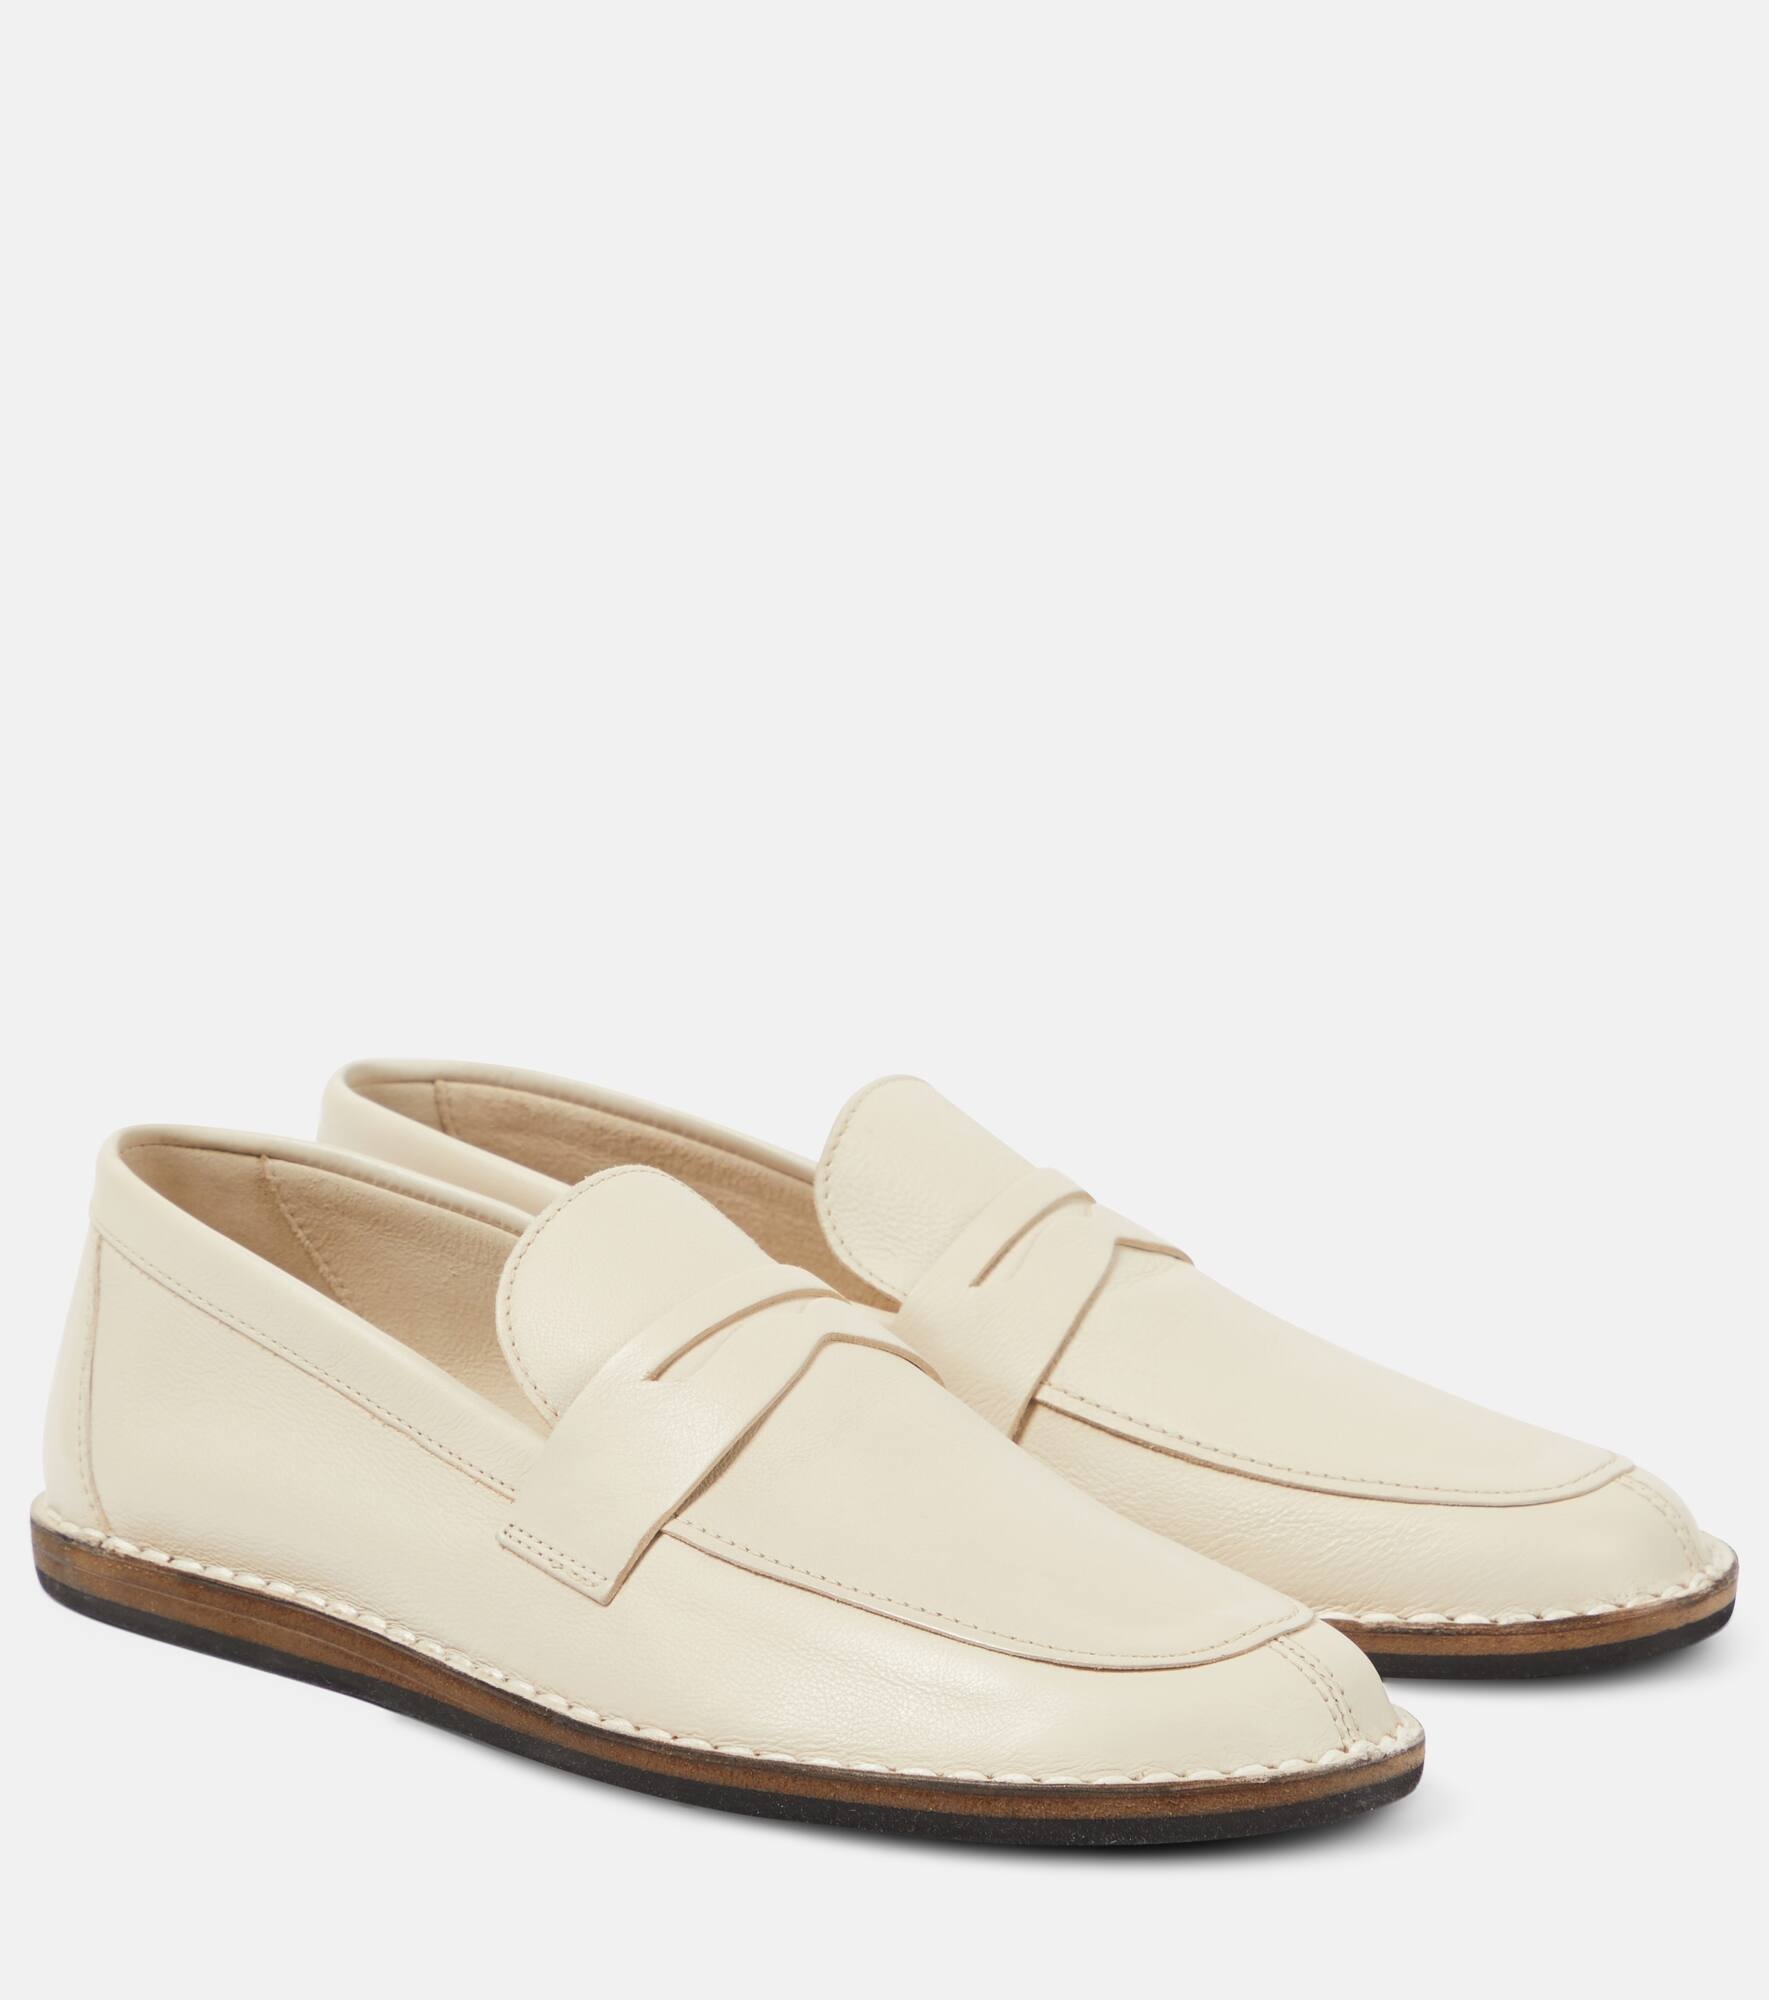 Cary leather penny loafers - 1